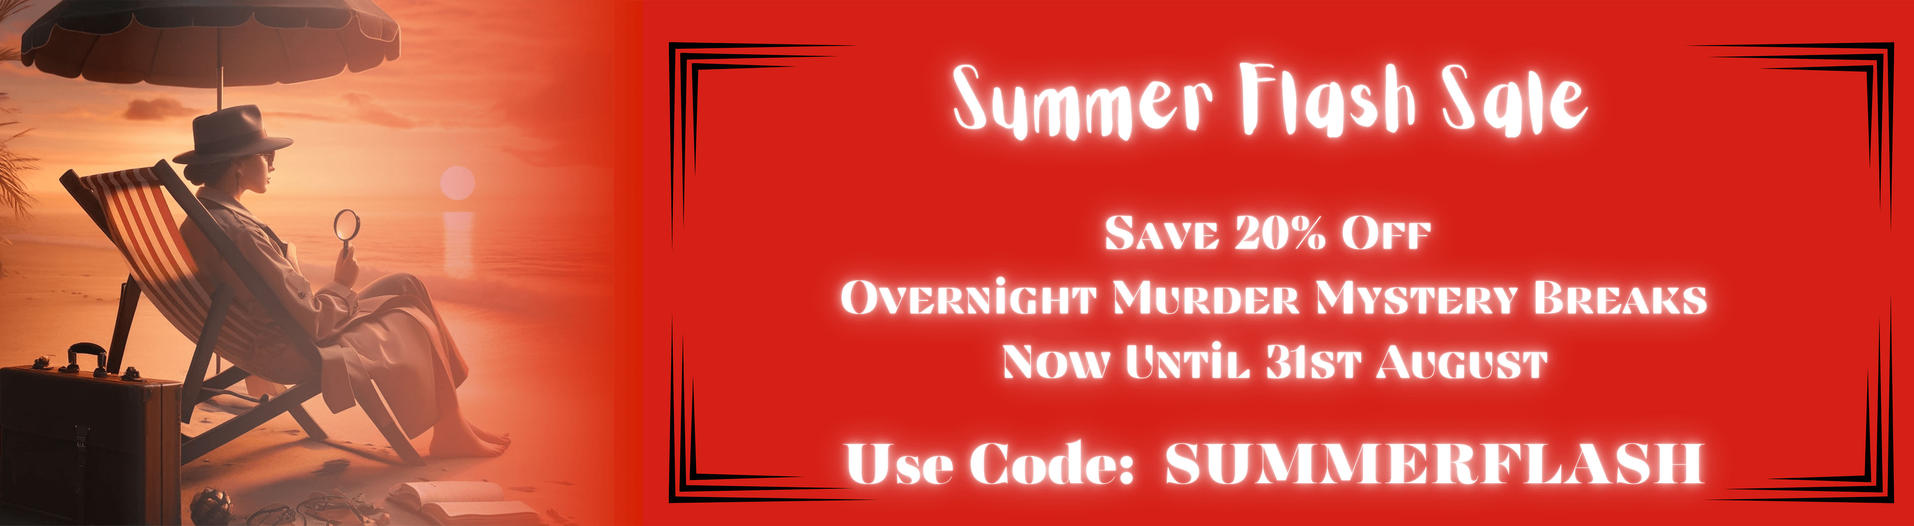 SAVE 20% OFF OVERNiGHT MURDER MYSTERY BREAKS NOW UNTiL 31ST AUGUST Use Code: SUMMERFLASH